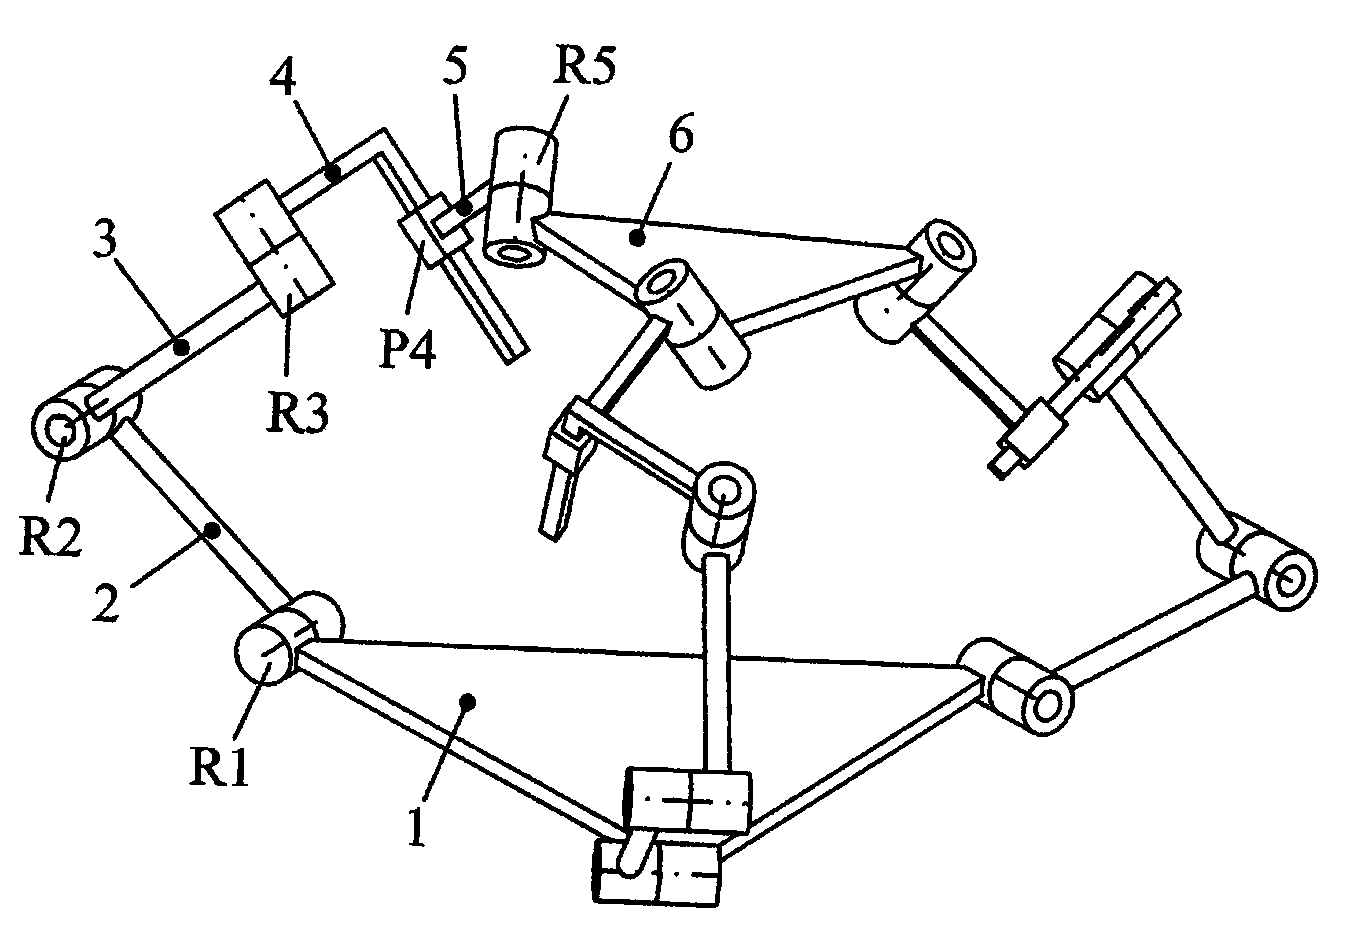 Non-concurrent axis symmetric two-rotation one-movement parallel mechanism with two-degree of freedom planar subchains